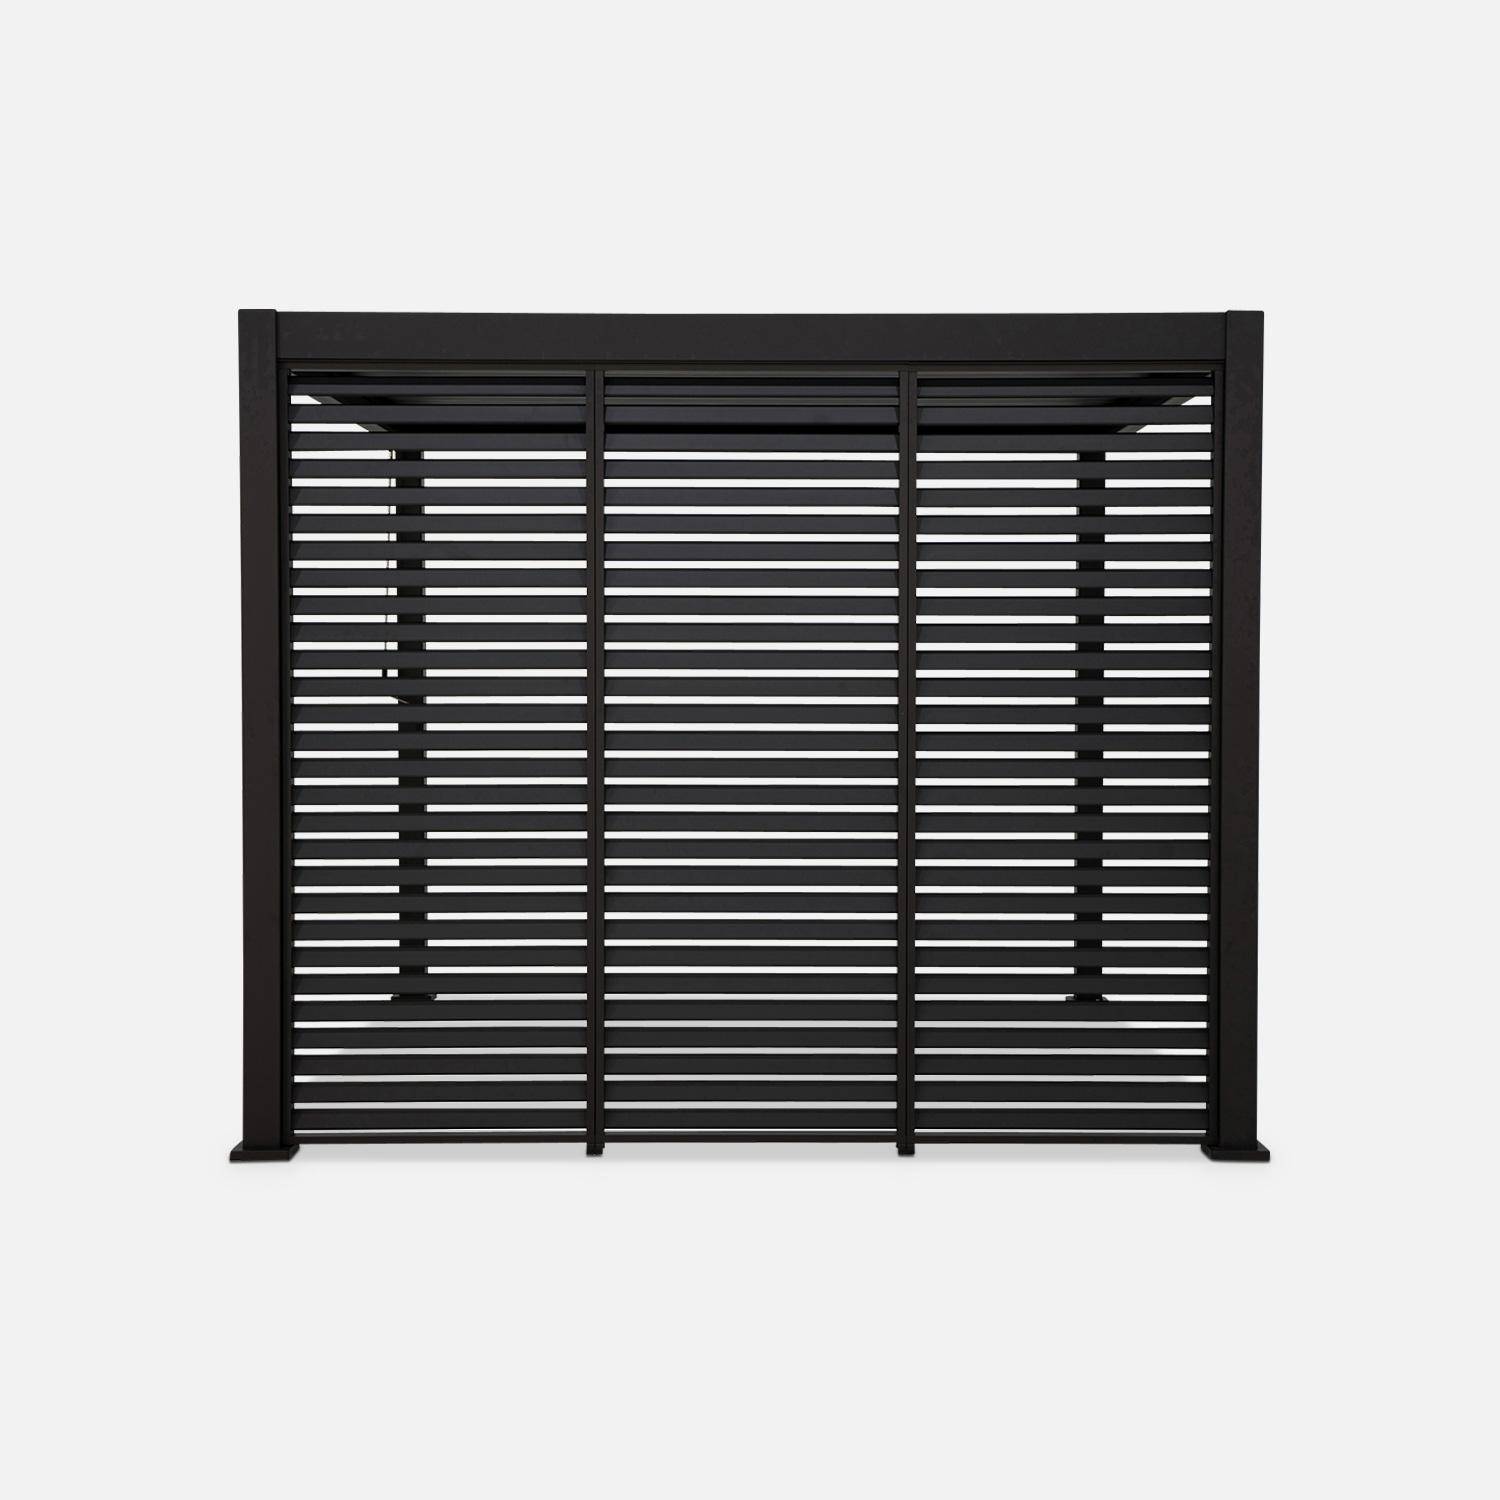 100cm Aluminium anthracite side panel for triomphe louvered pergola (3x4 and 3x3v2),sweeek,Photo6